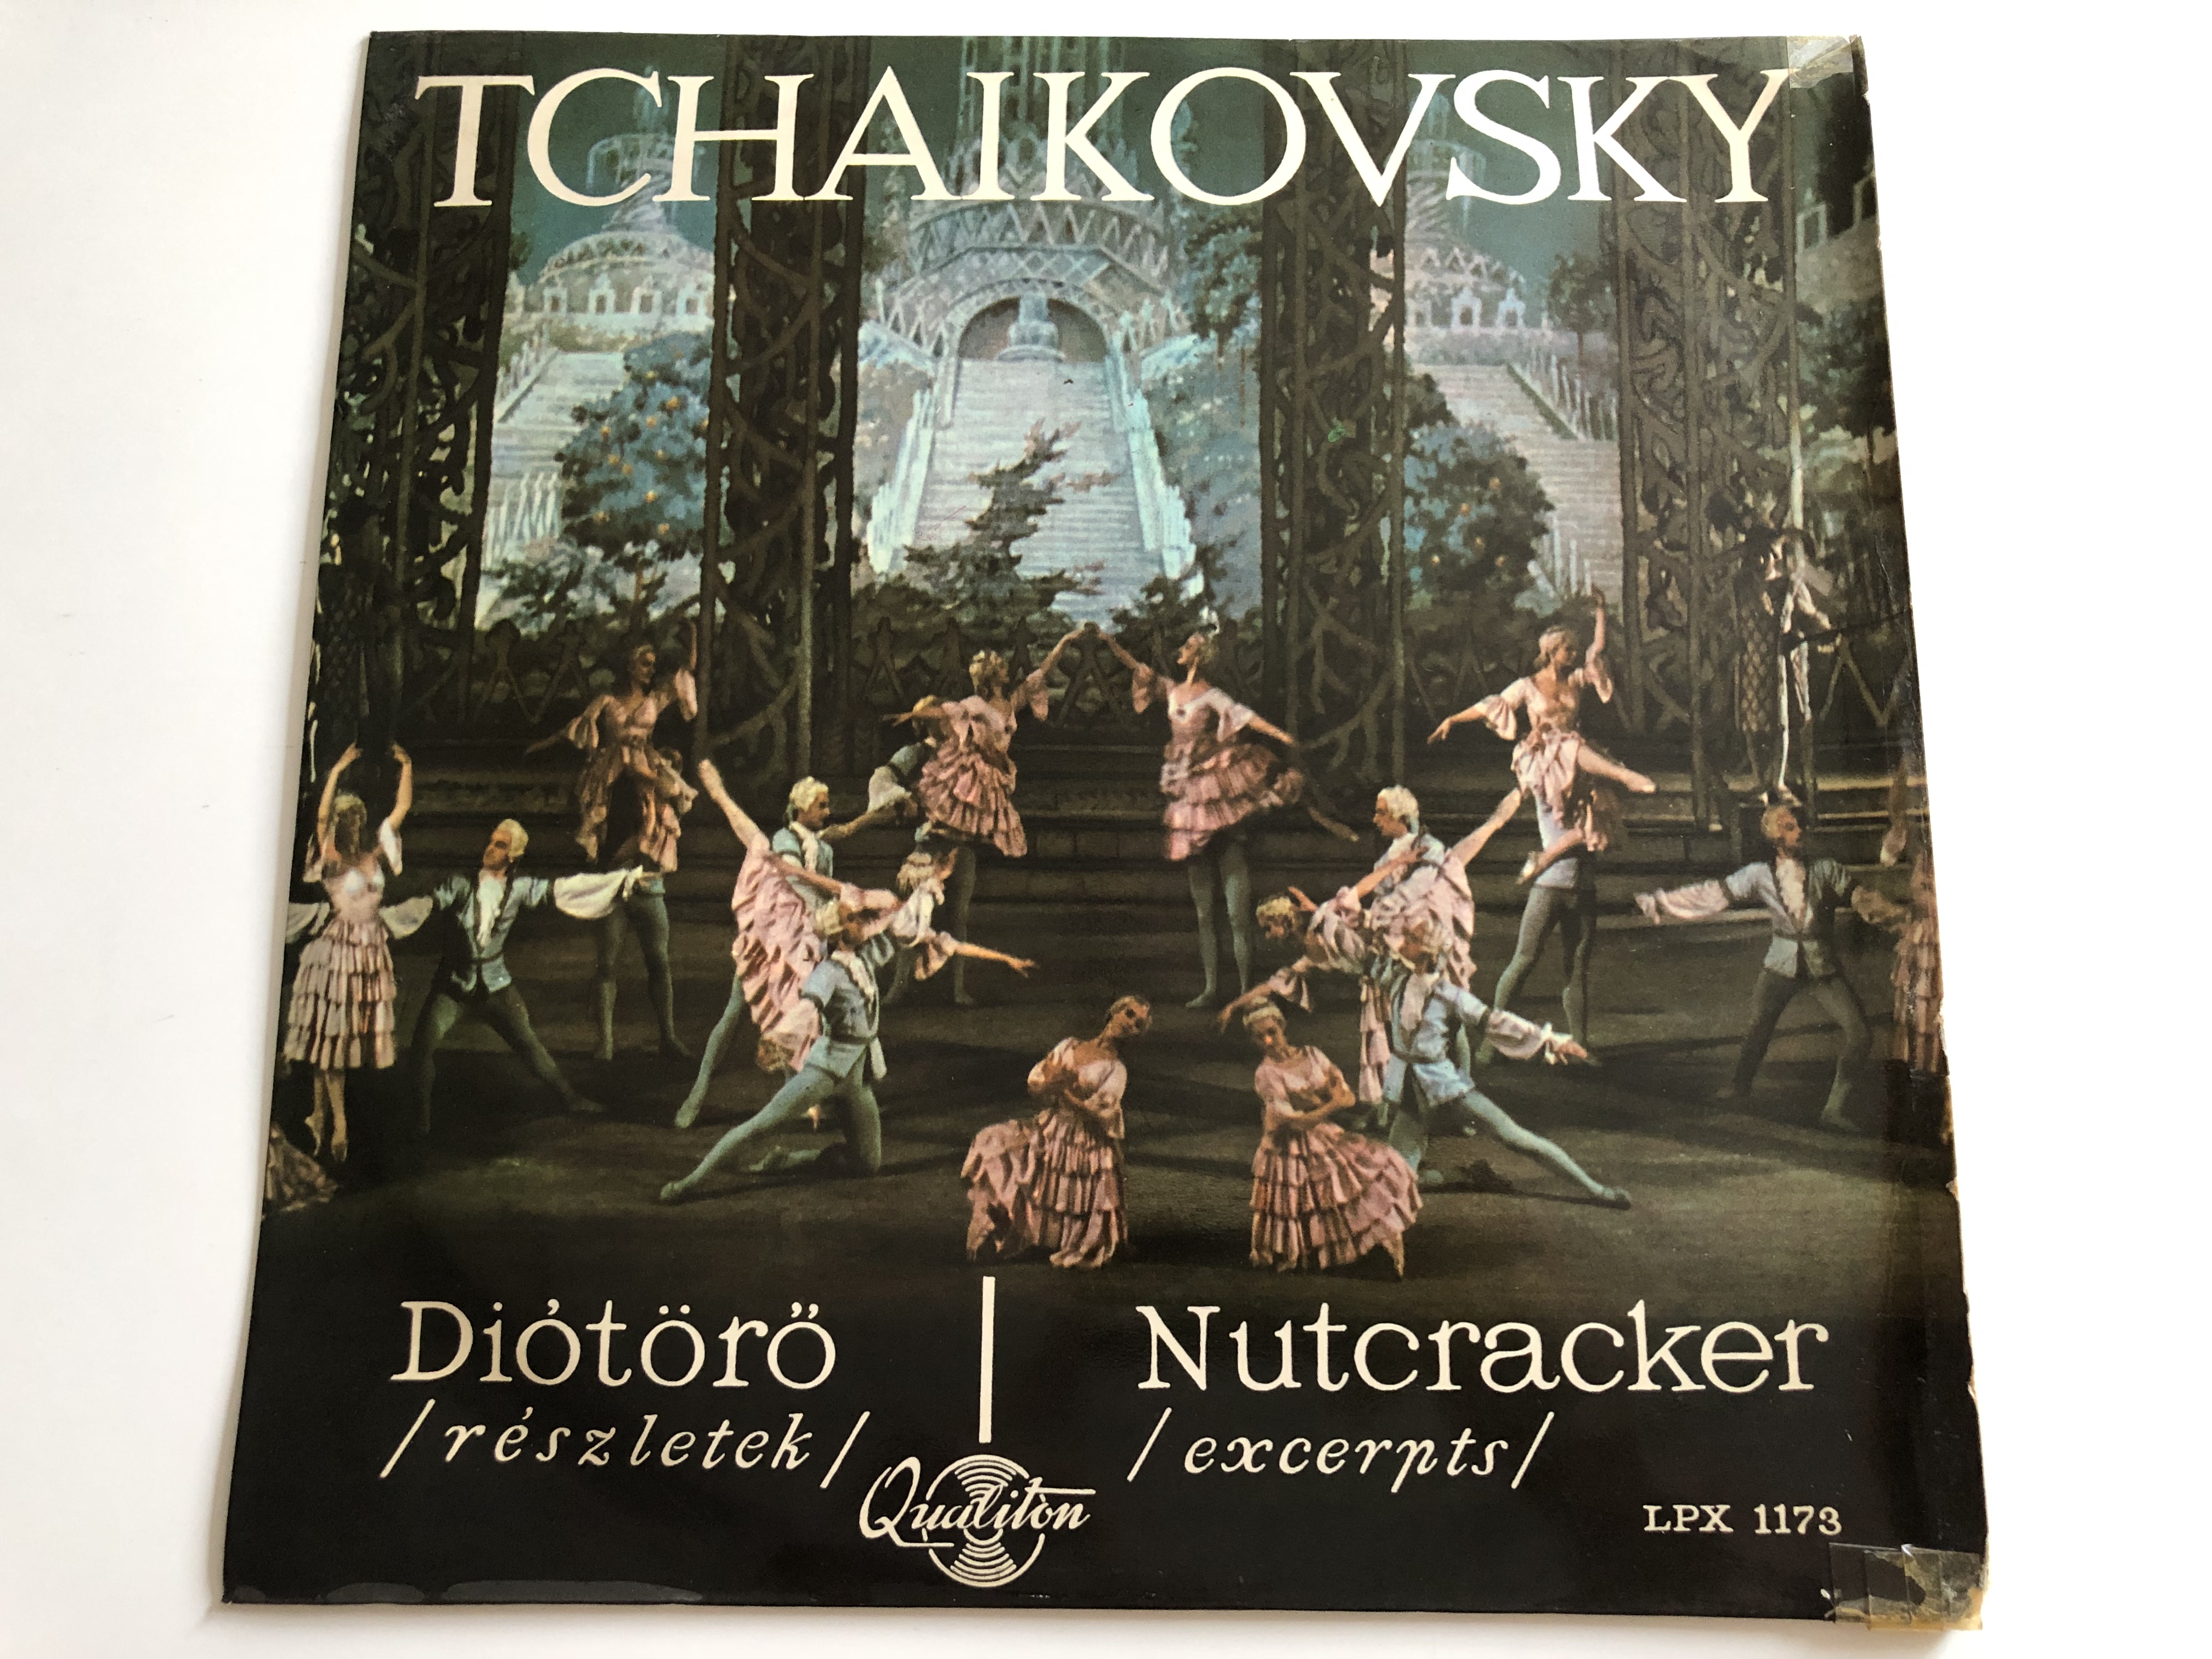 tchaikovsky-di-t-r-r-szletek-nutcracker-excerpts-orchestra-of-the-hungarian-state-opera-house-conducted-franz-allers-qualiton-lp-lpx-1173-1-.jpg